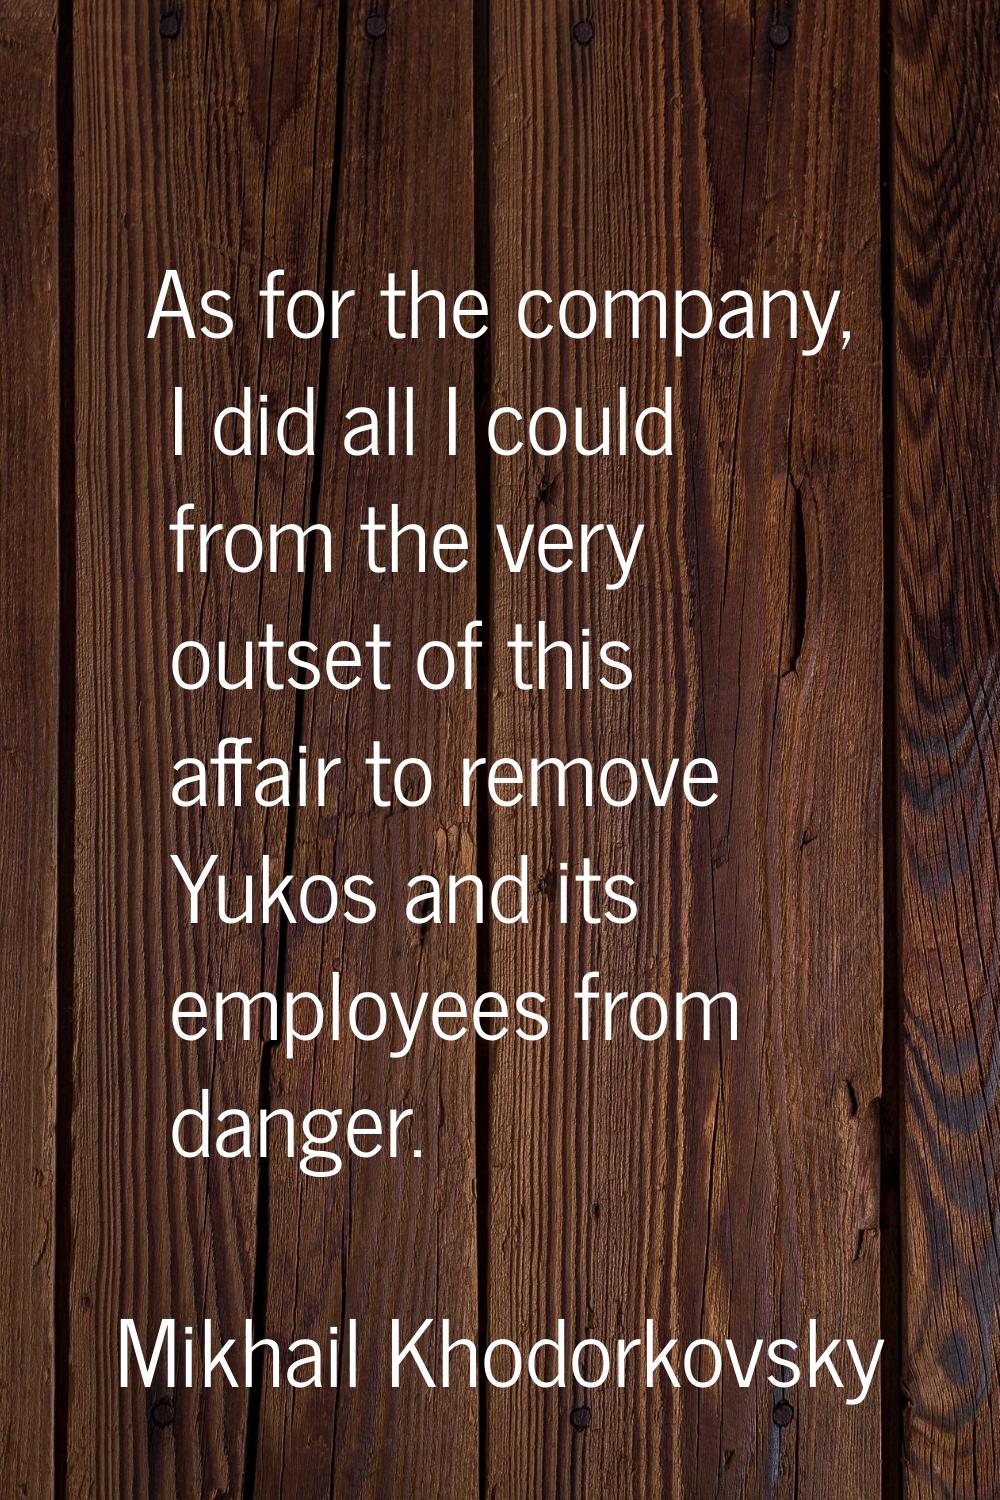 As for the company, I did all I could from the very outset of this affair to remove Yukos and its e